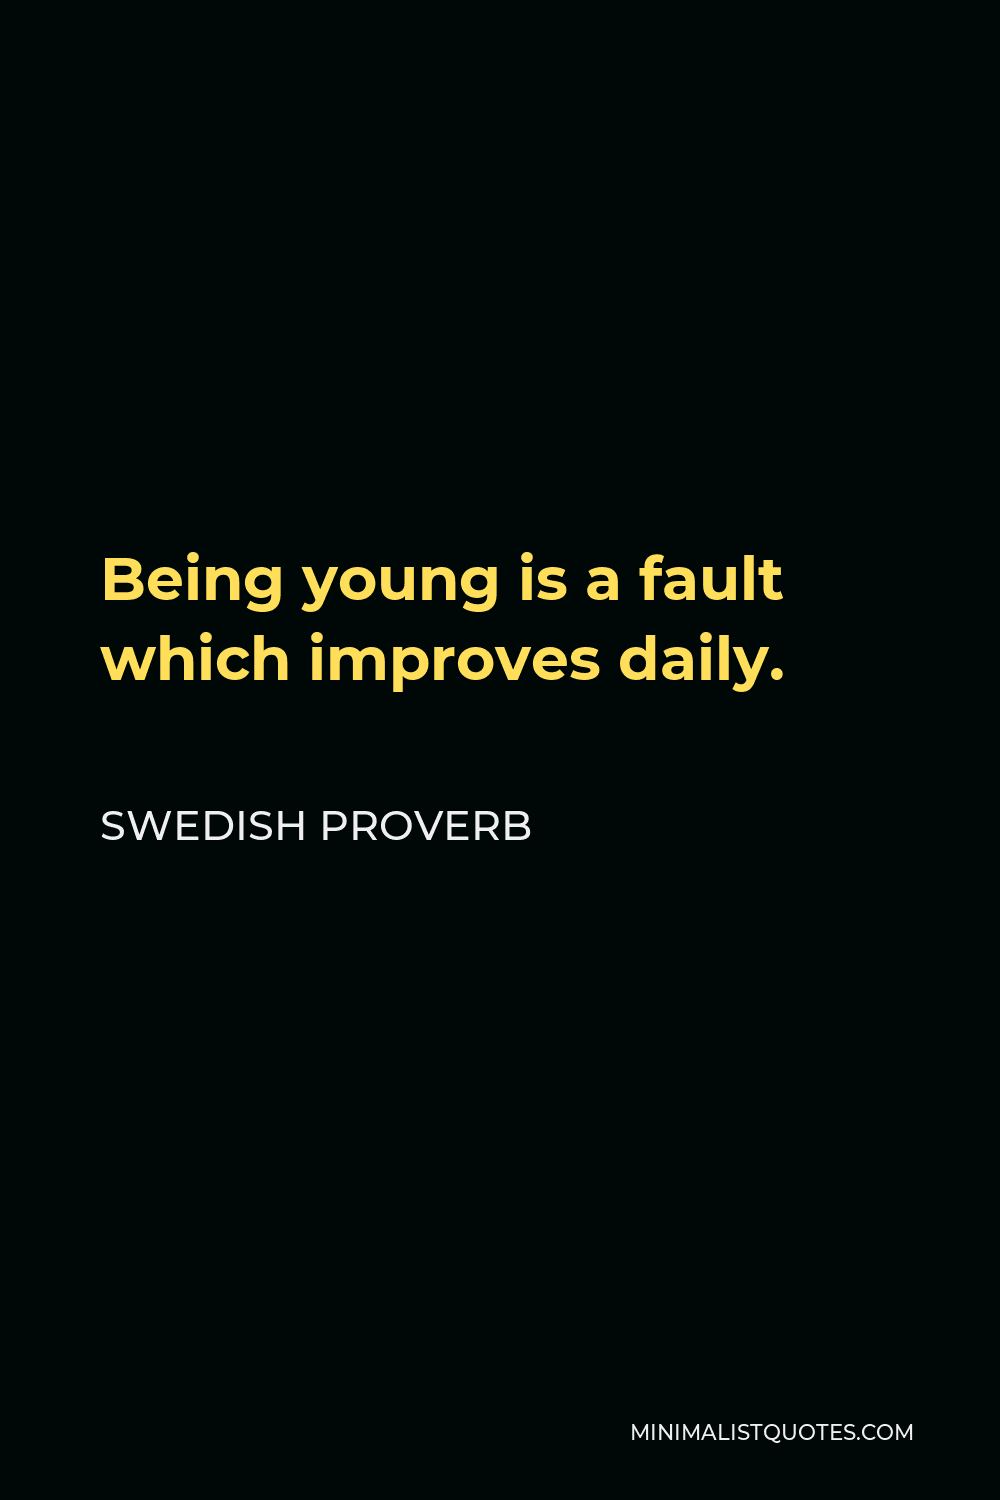 Swedish Proverb Quote - Being young is a fault which improves daily.